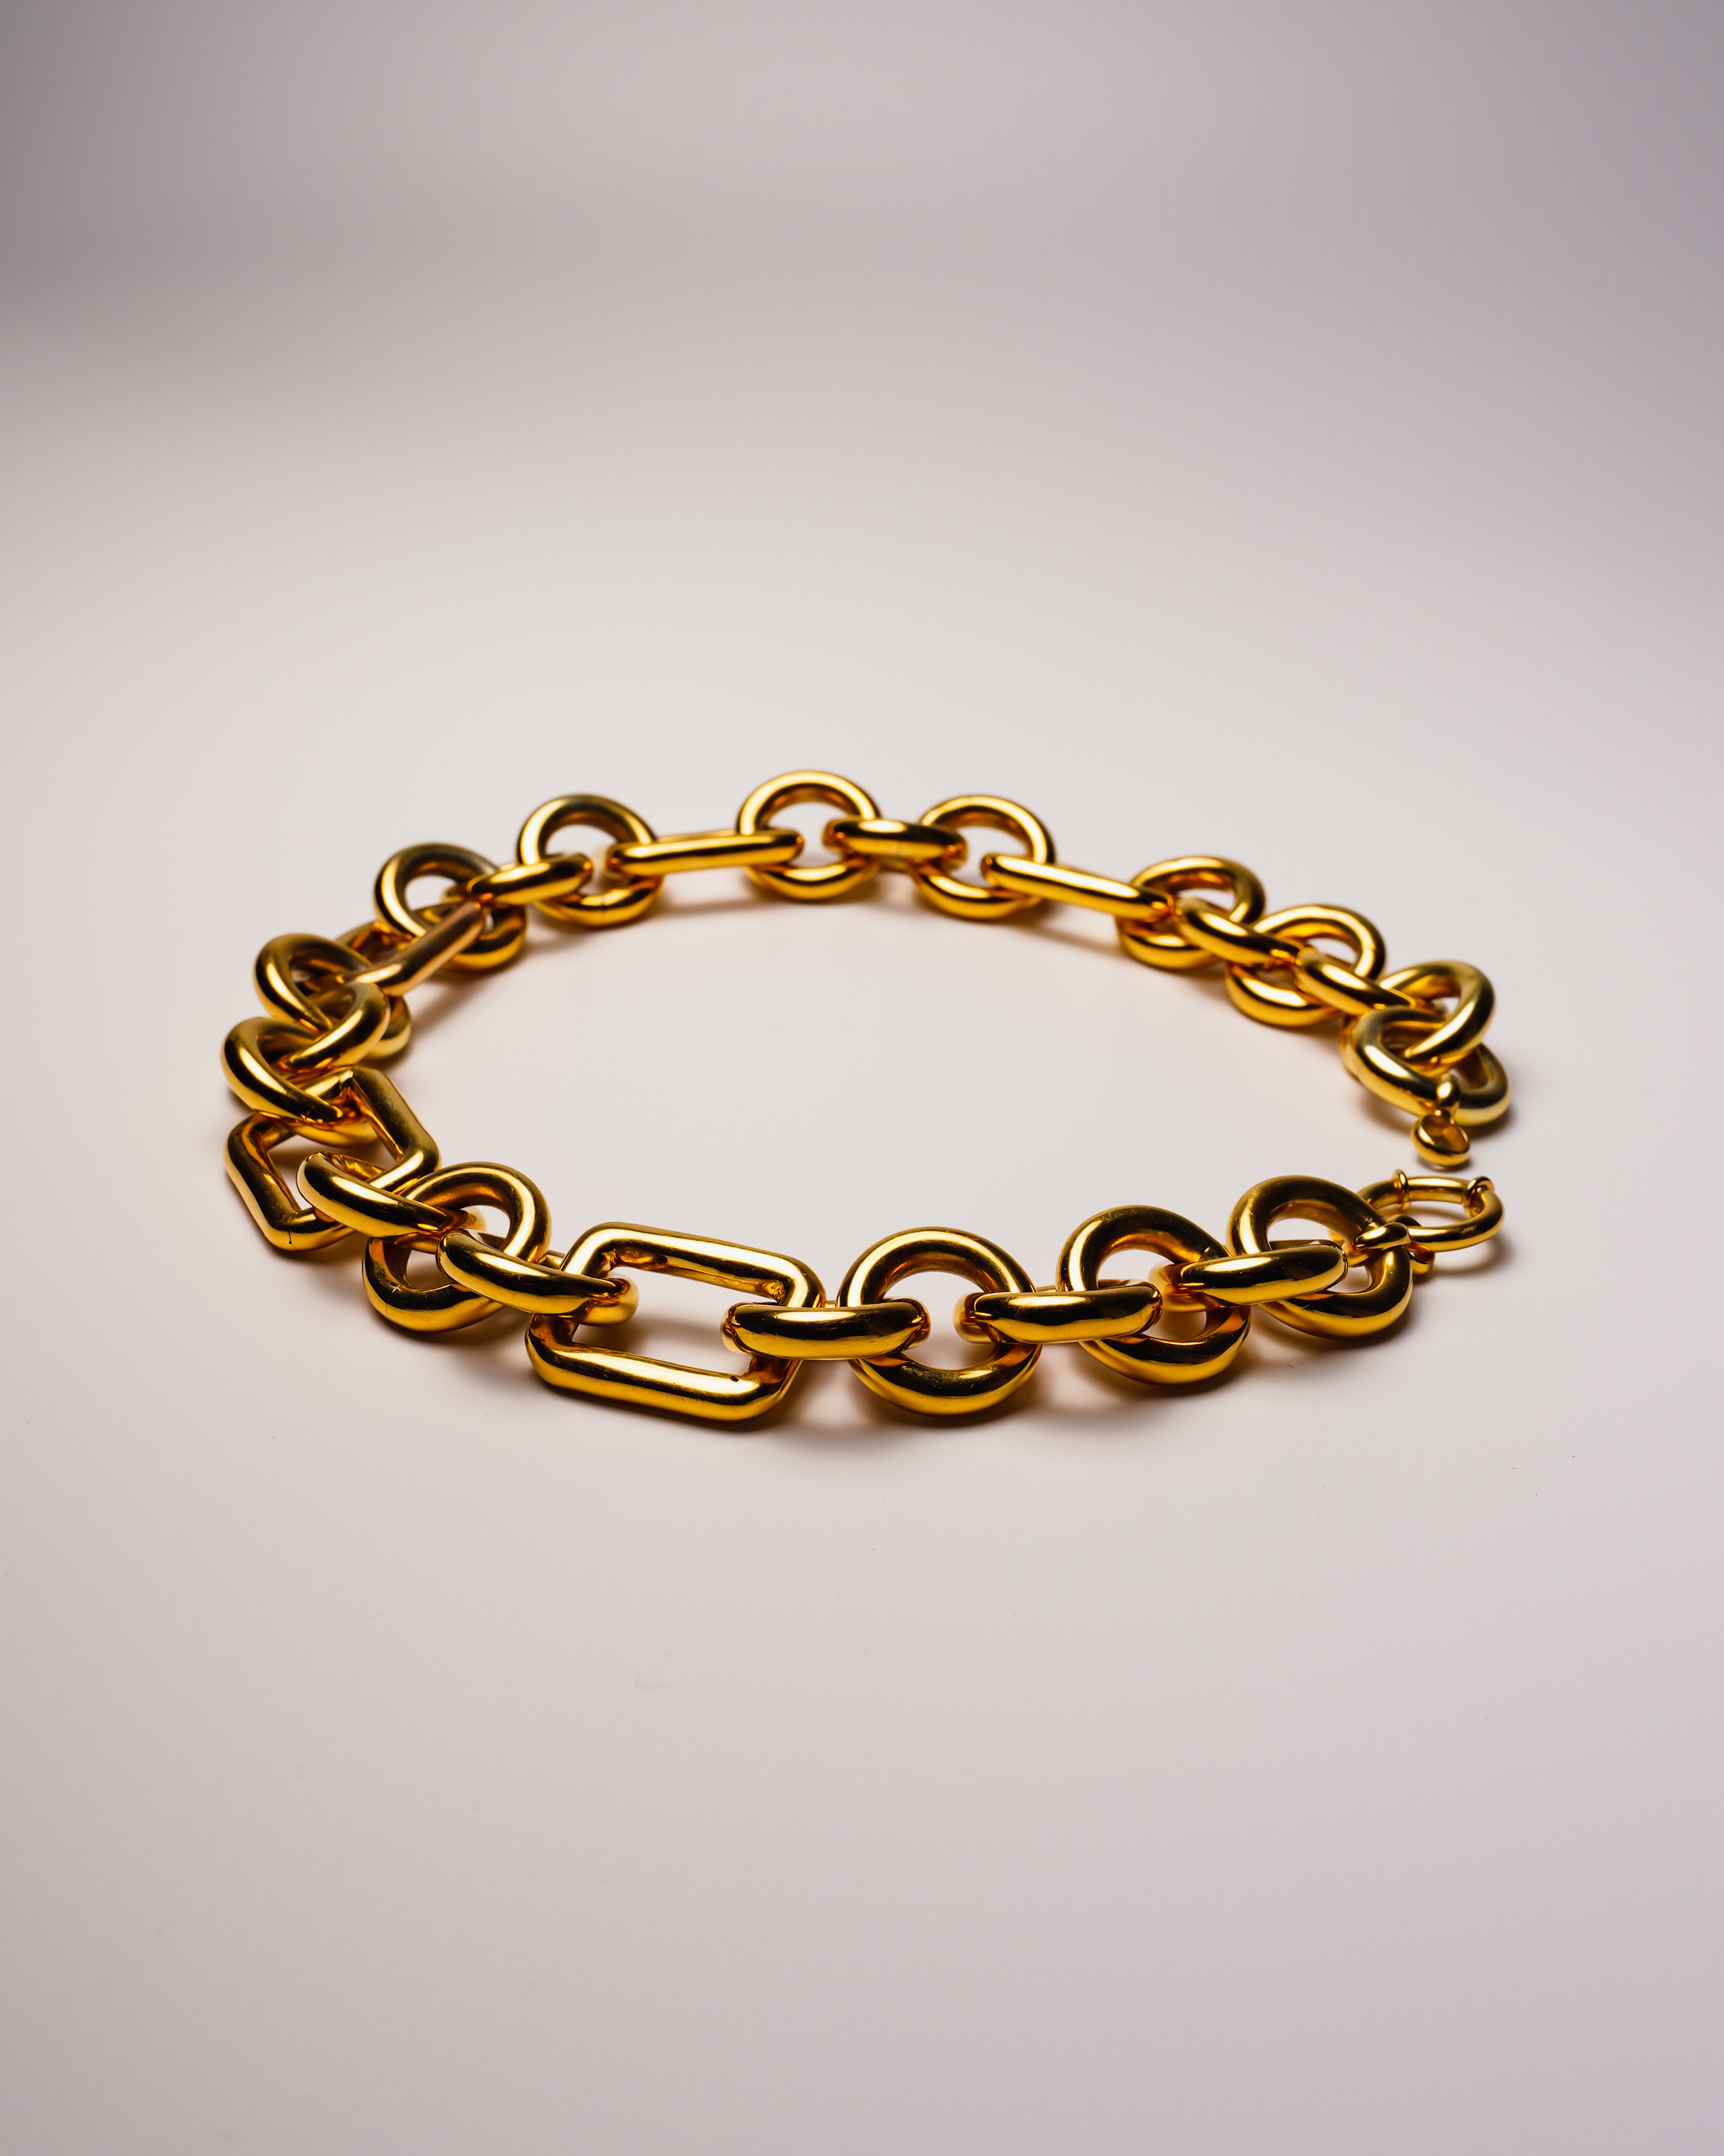 24K yellow gold vermeil square chain bracelet in 925 silver